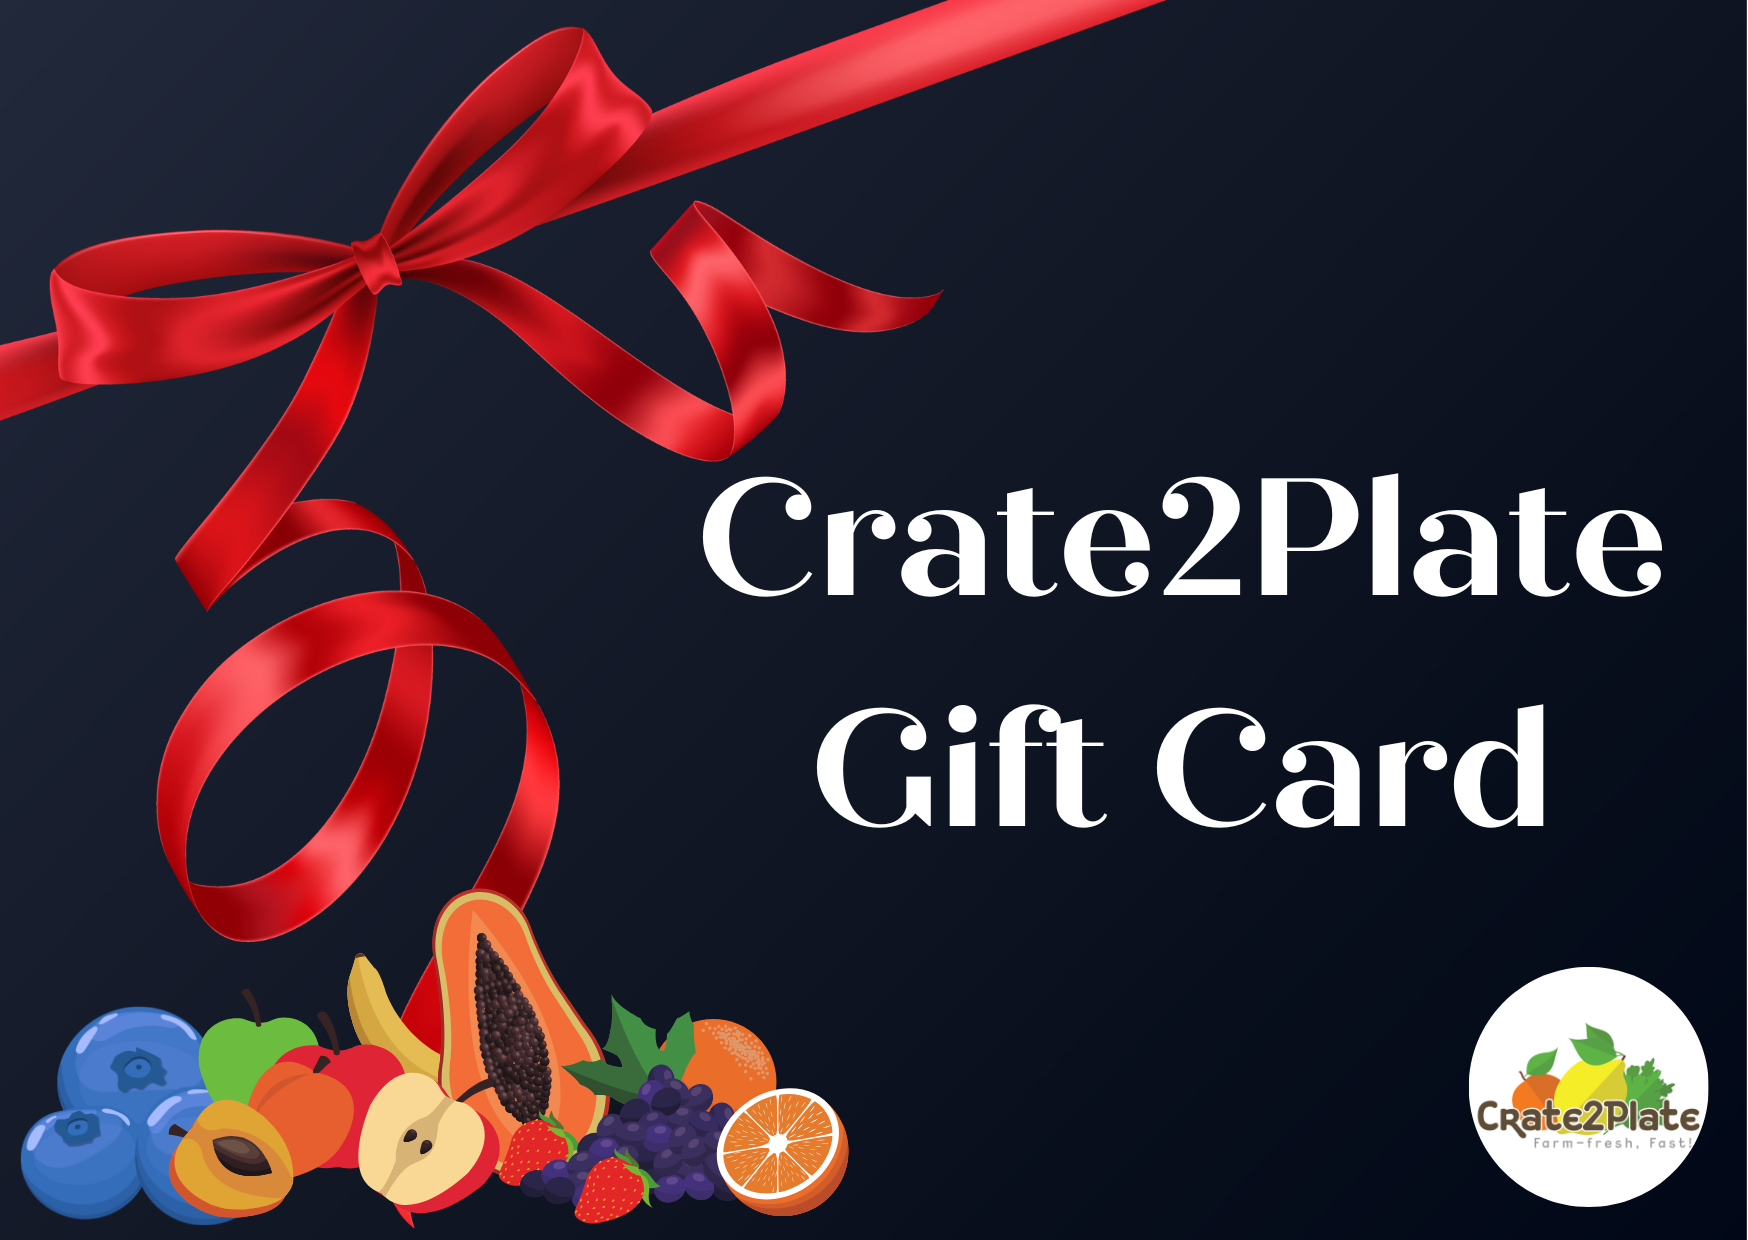 Crate2Plate Gift Card